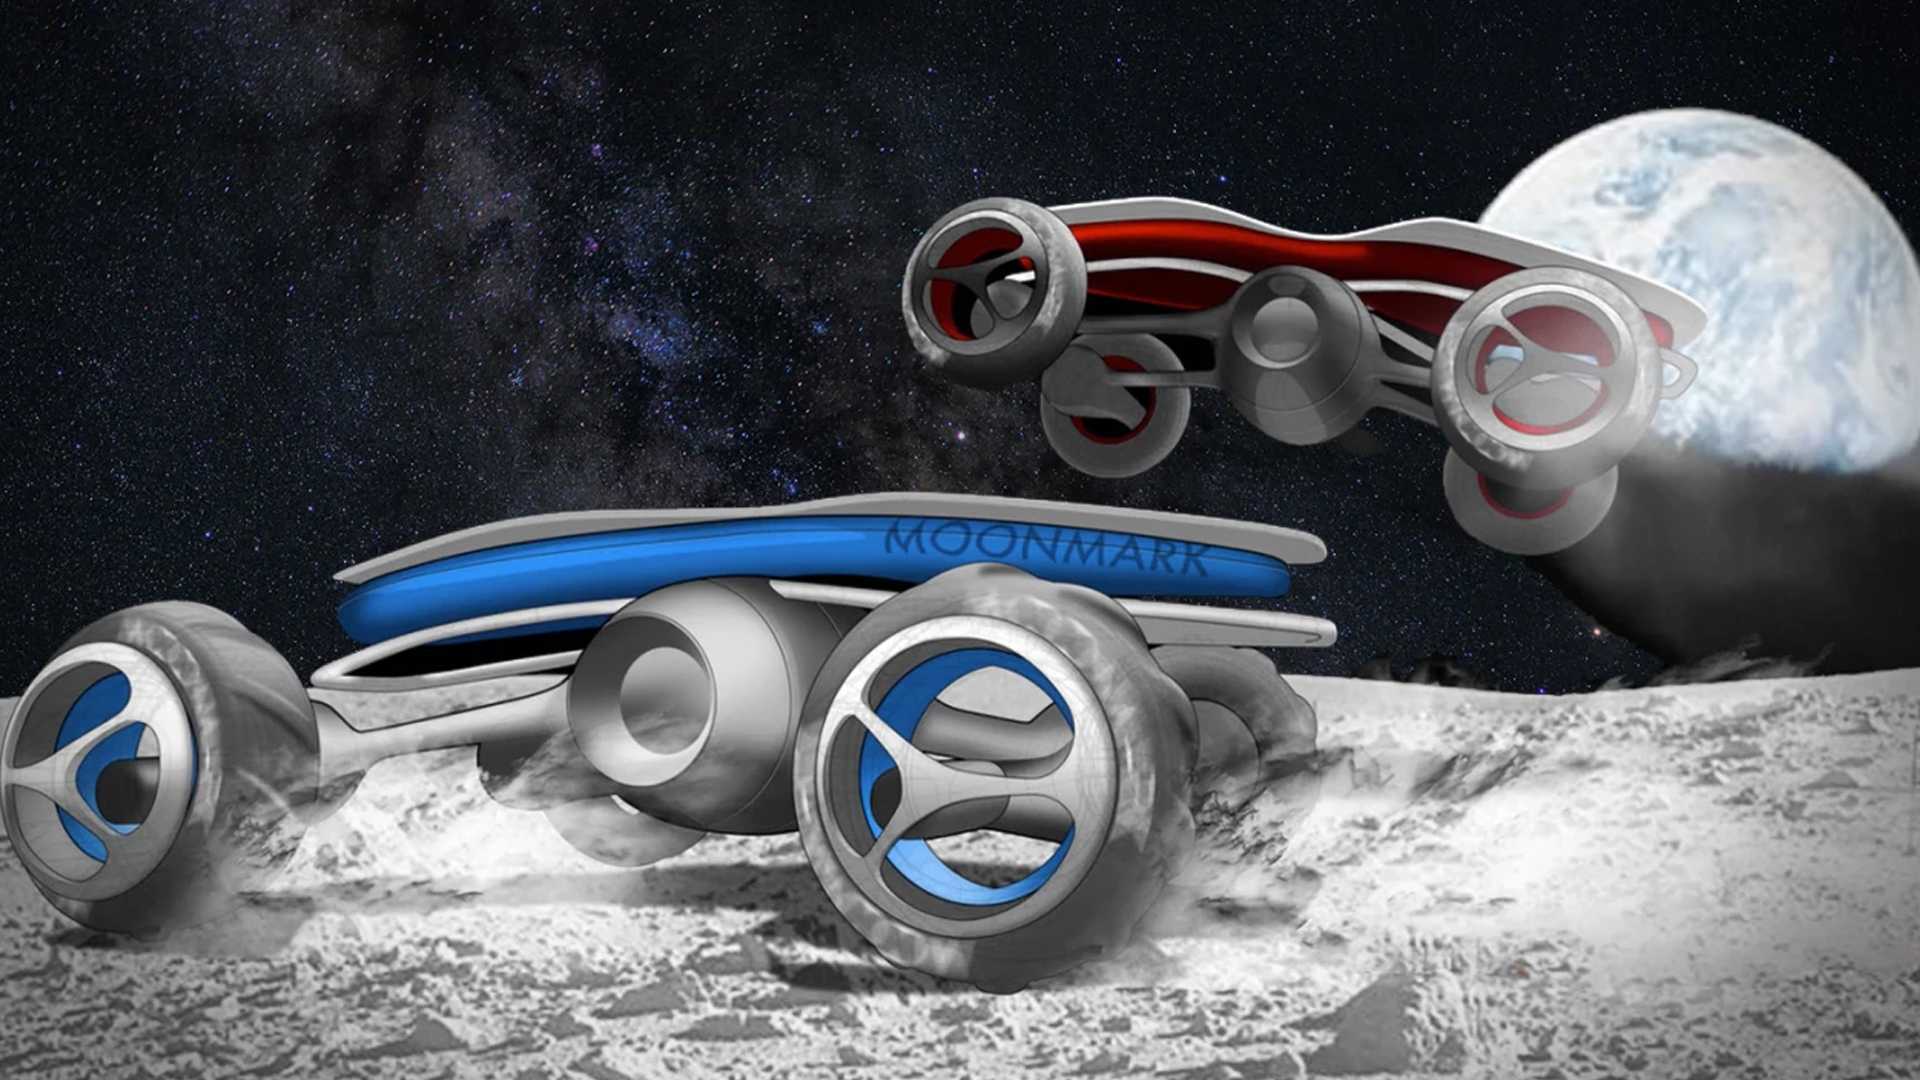 High school students design RC cars for a race ... on the moon